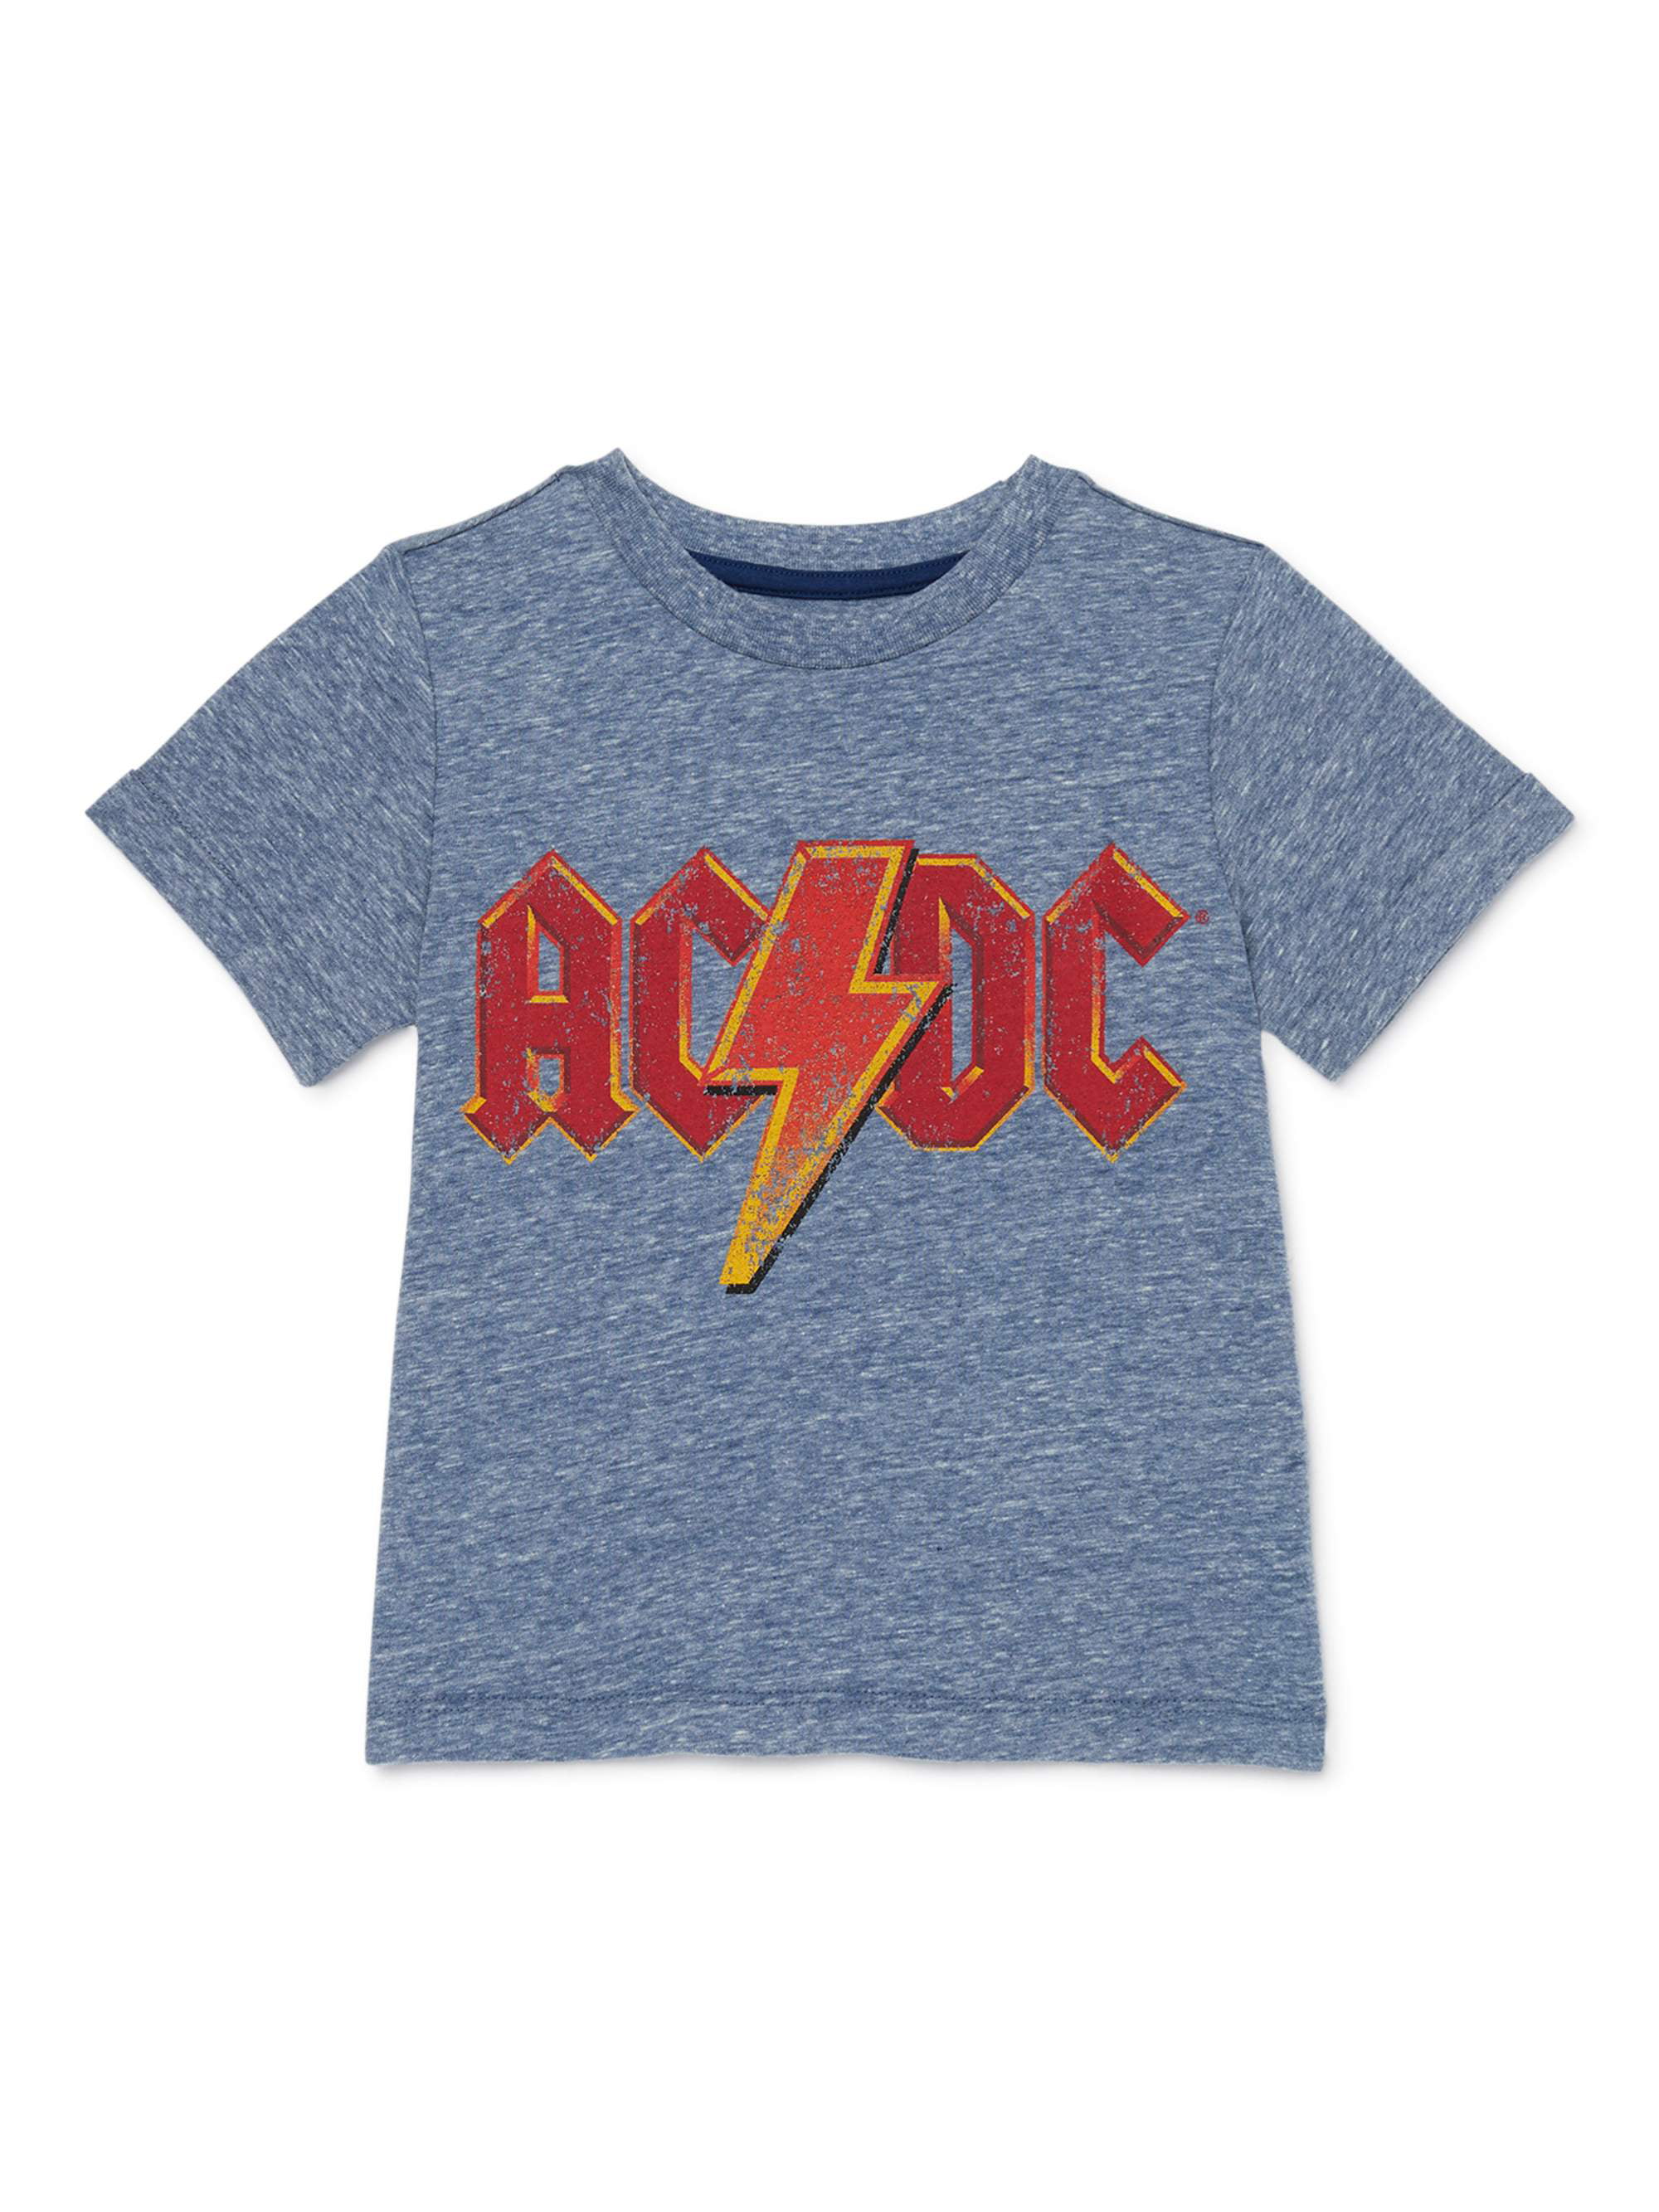 Ac/Dc Toddler T Shirt Horns Band Logo New Official Black 12 Months To 5 Yrs Size 3 Years